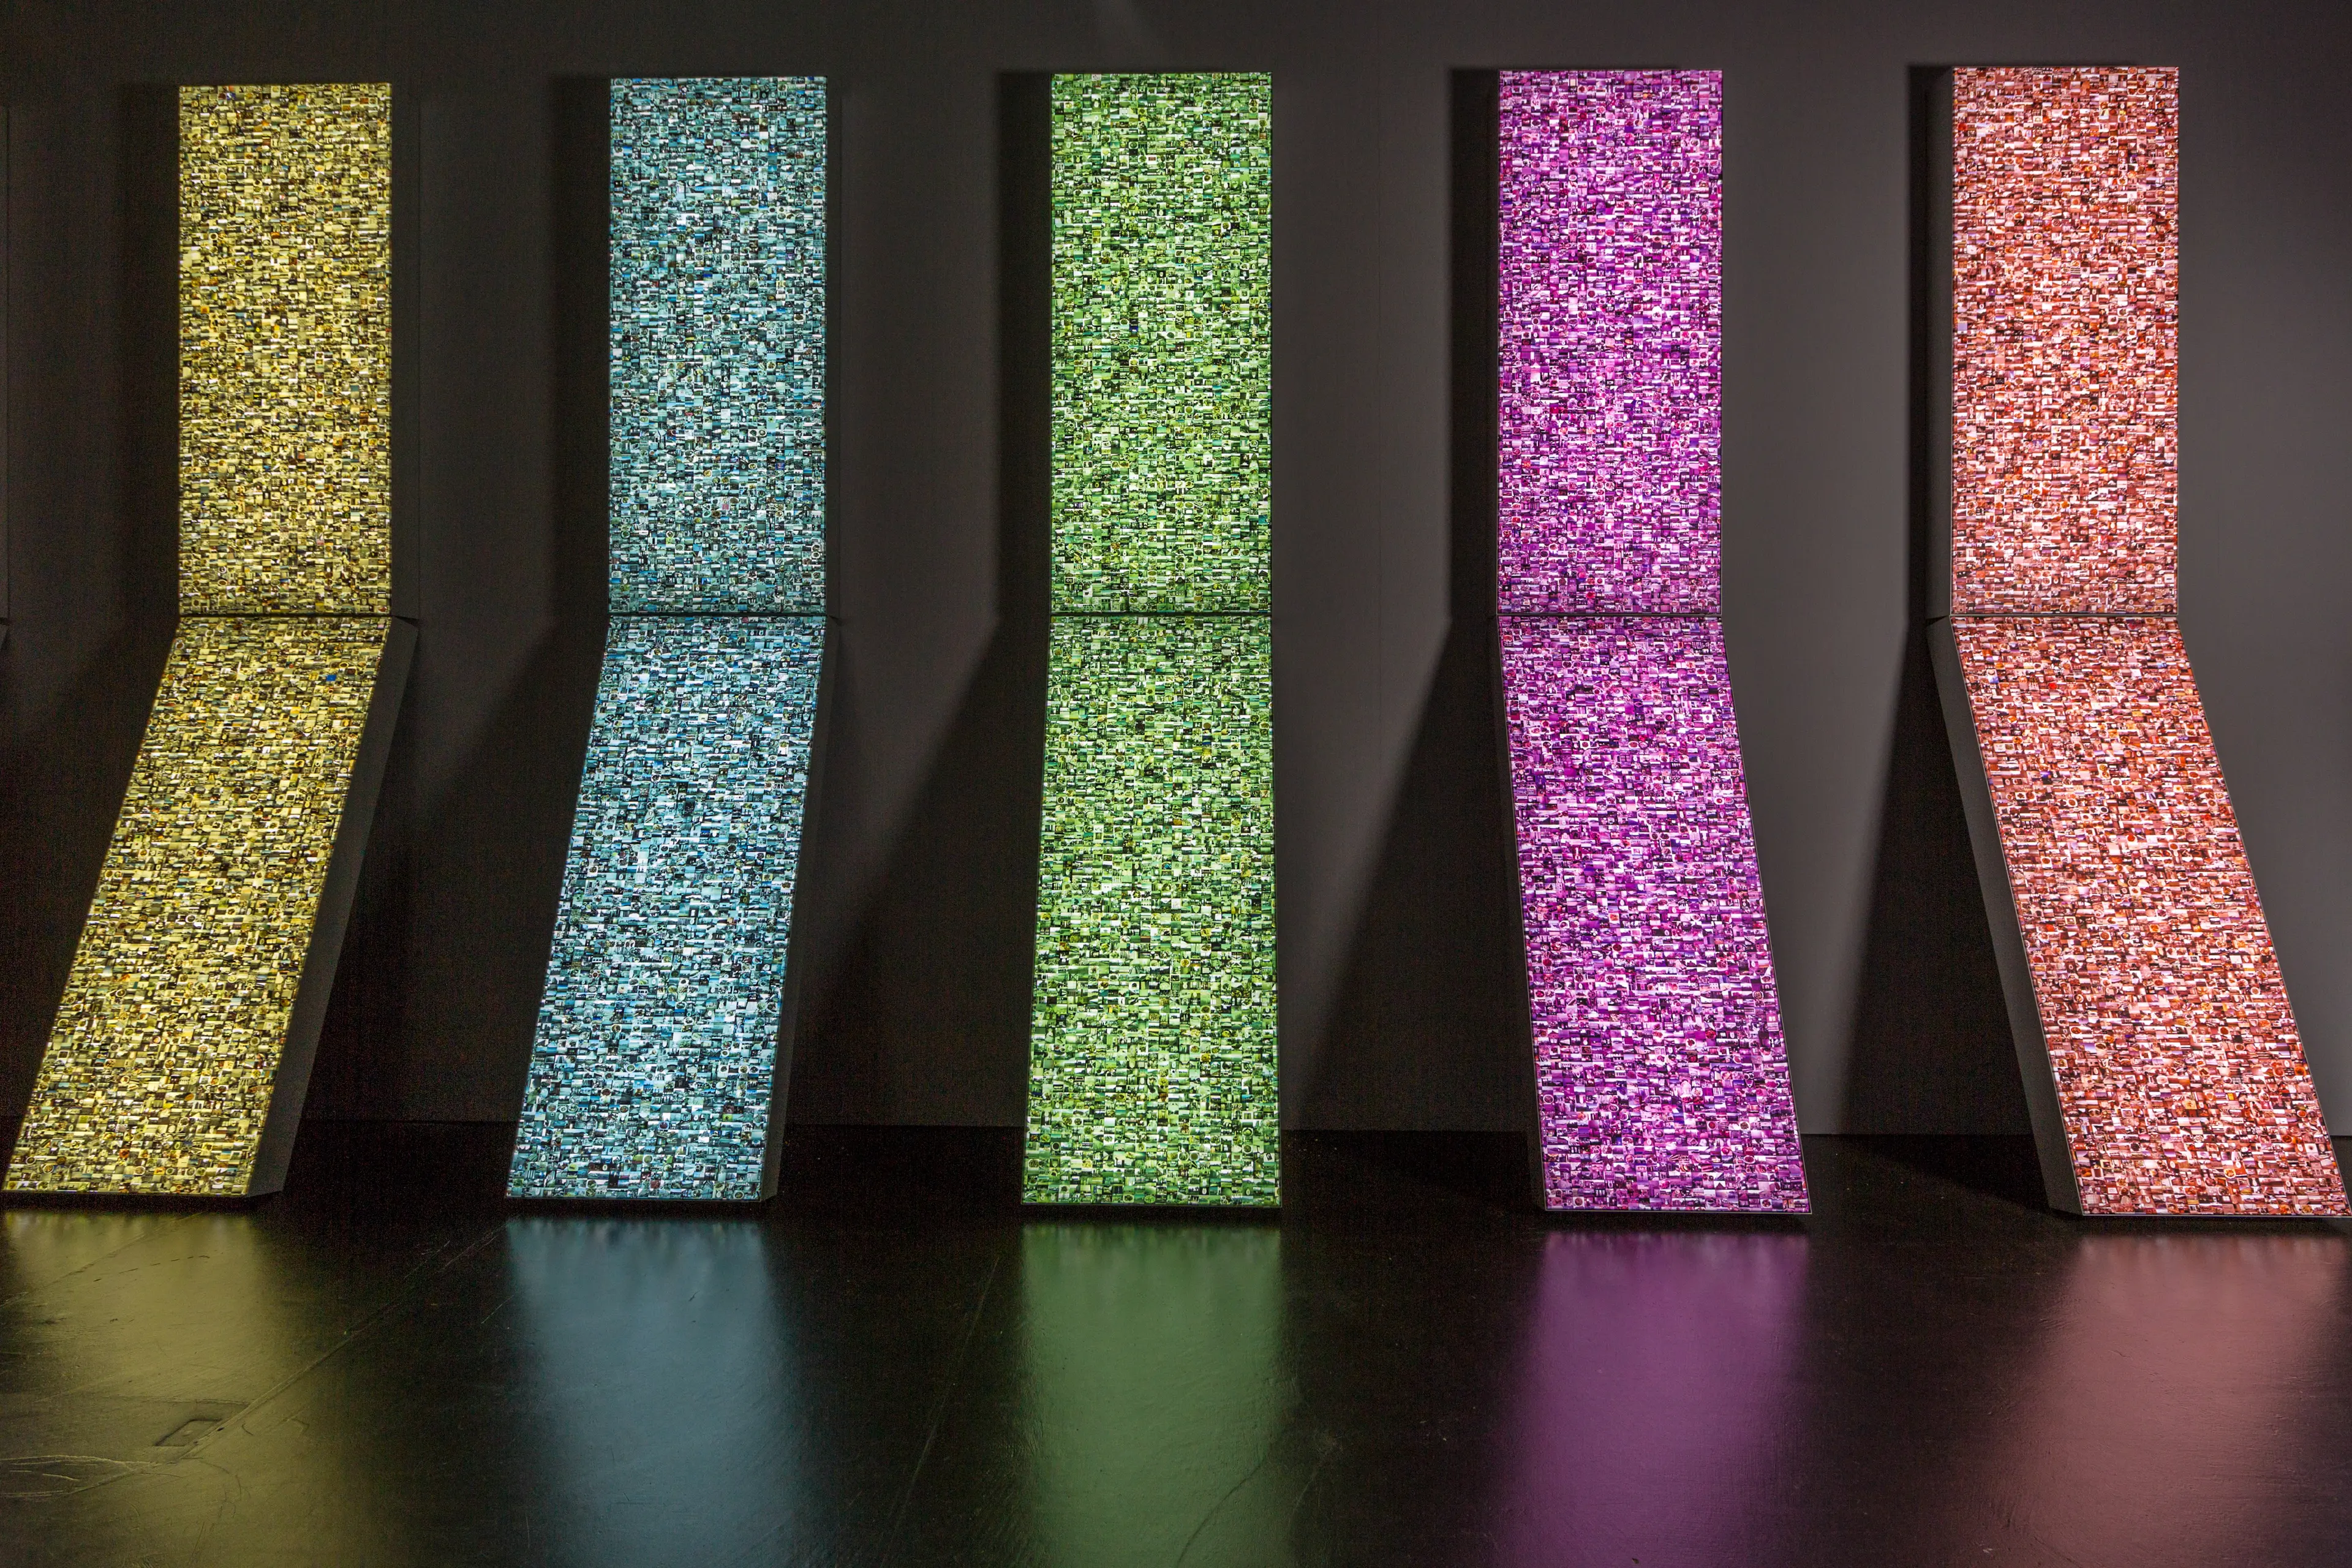 Picture of video installation with 5 V-shaped lcd screens leaning agains the wals, each of different color and composed of smaller images.